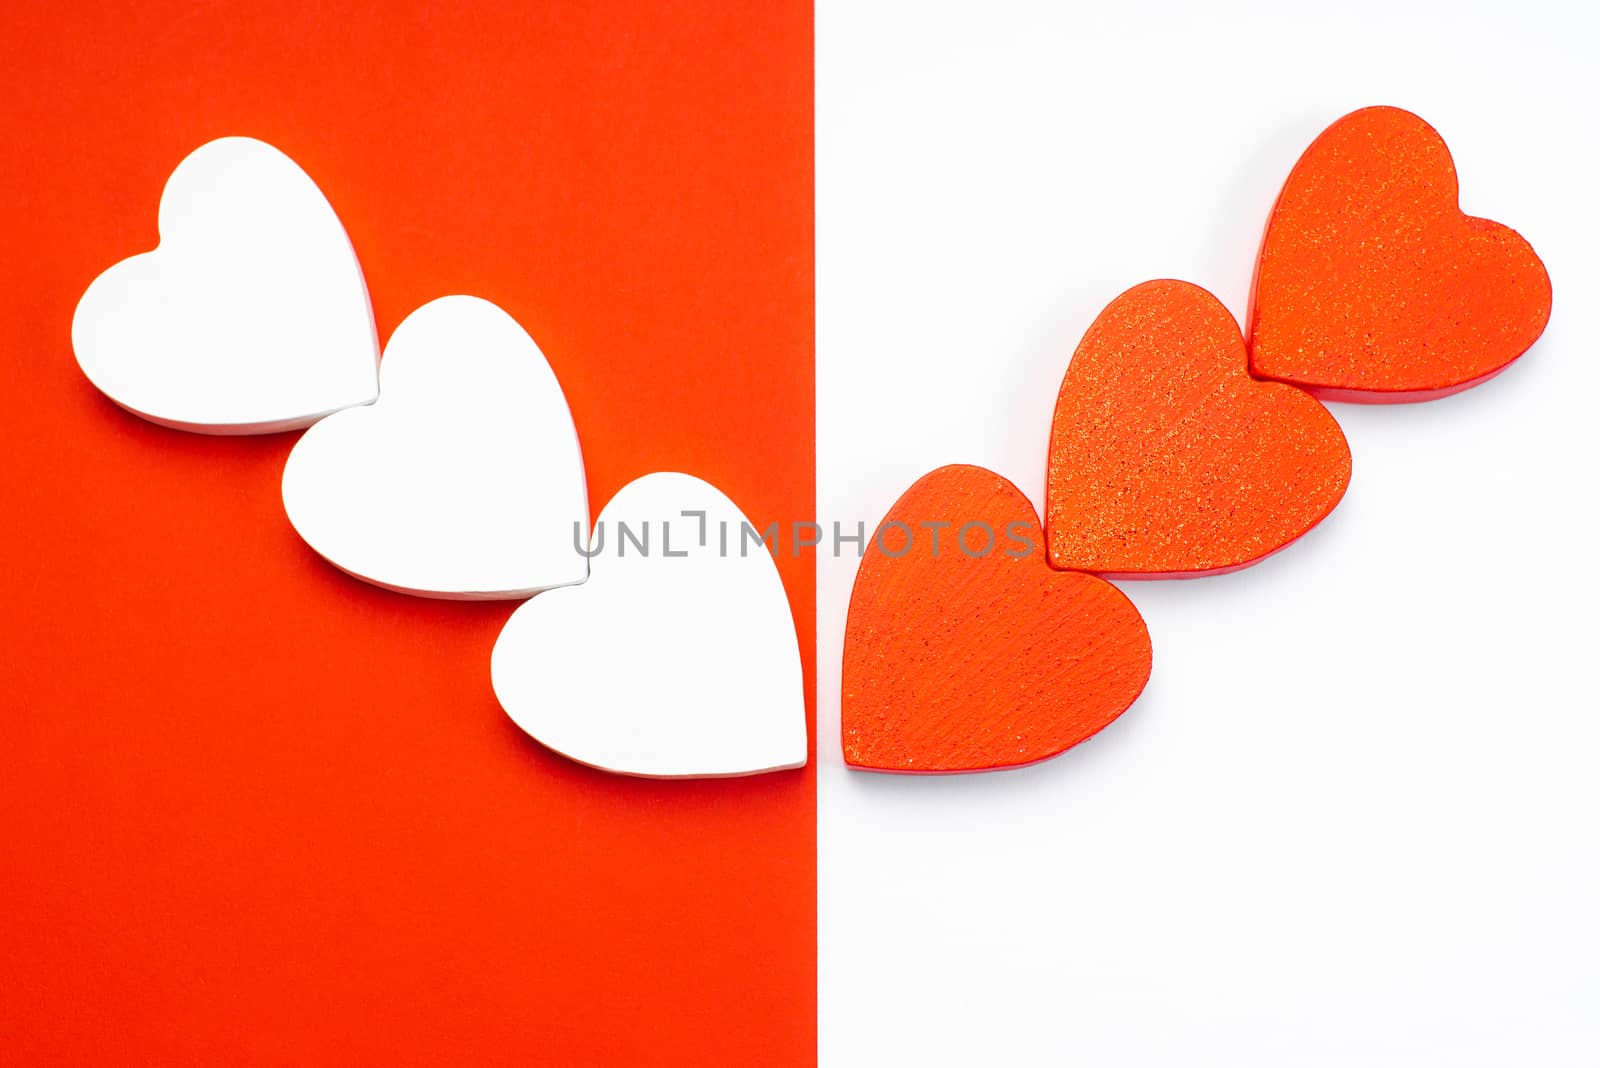 White and red wooden hearts on a red and white background. Blank for the designer. Valentines day concept. Greeting card. Valentine's Day. Copy space.